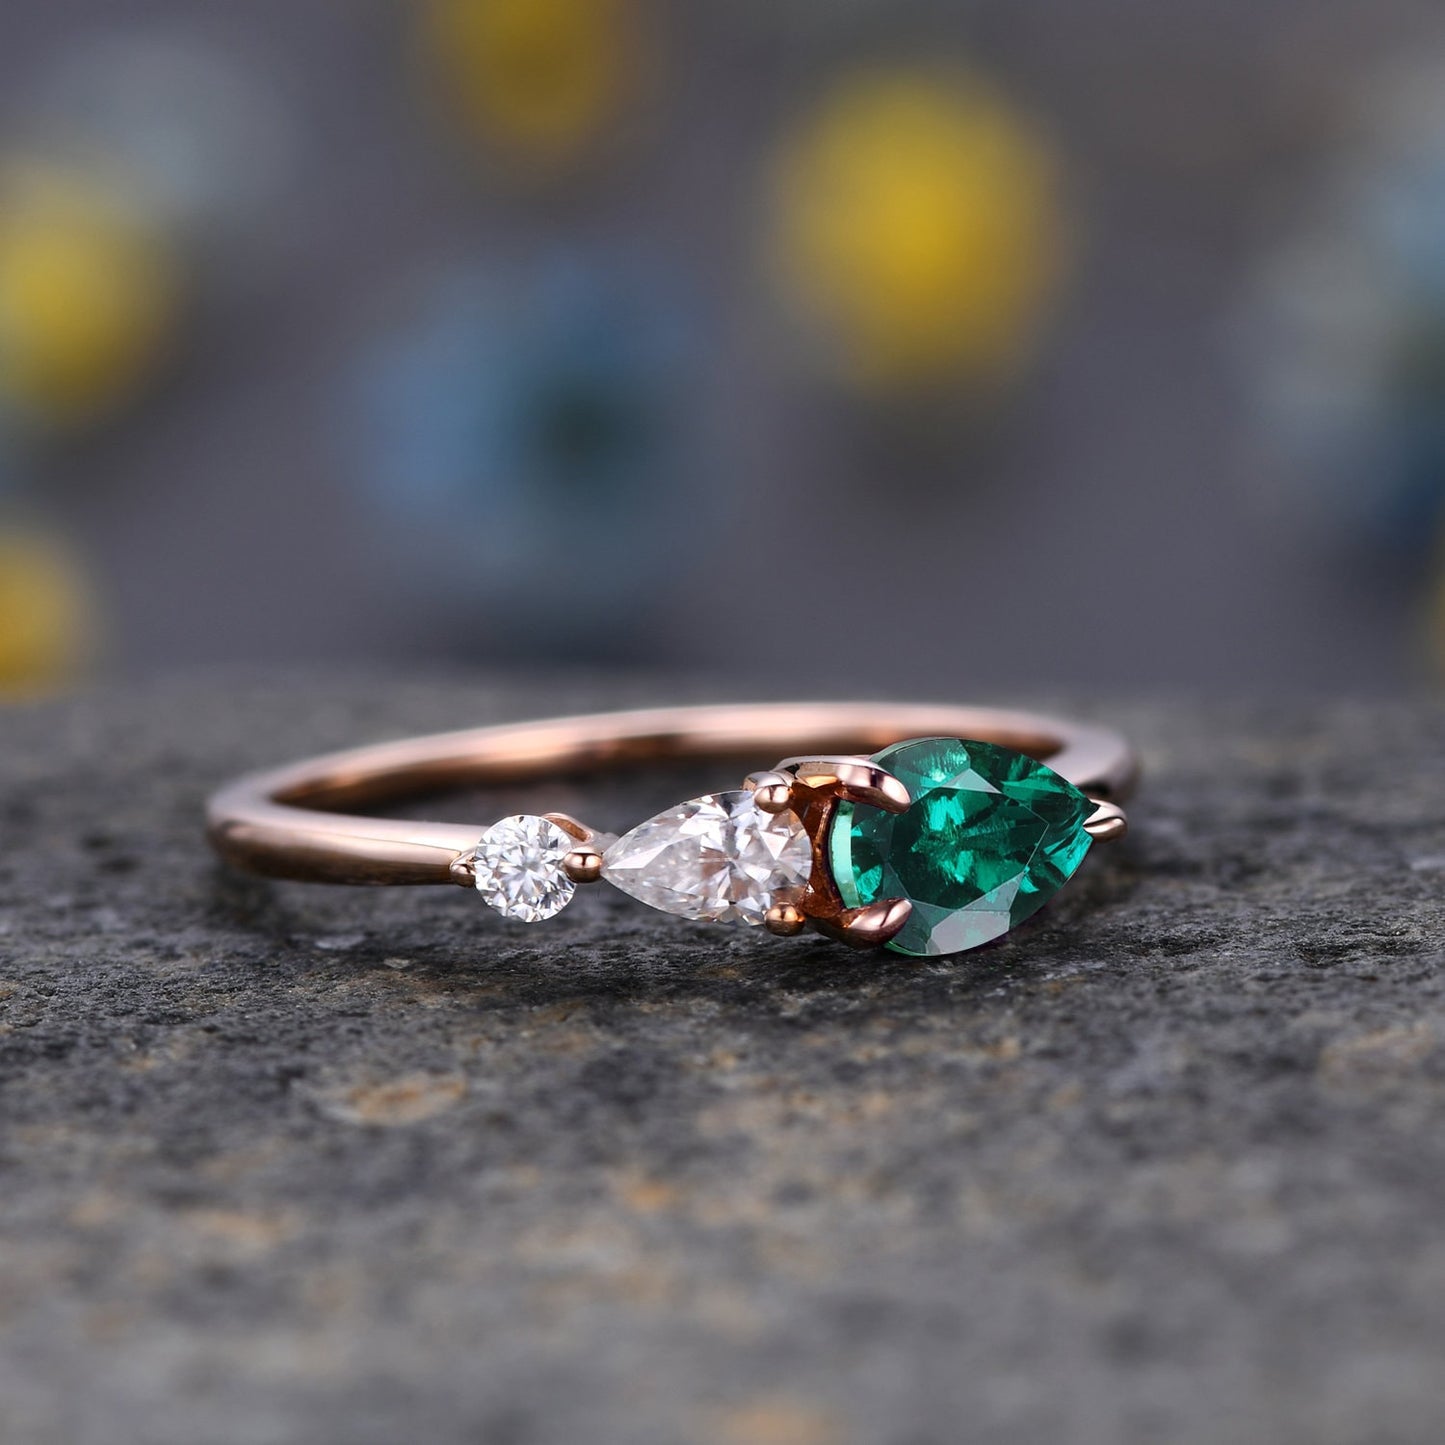 Vintage Emerald Ring Engagement Ring,Pear Cut Gems,Art Deco Moissanite Wedding Band,3 Stone Unique Women Bridal Promise Ring Gift,Rose gold